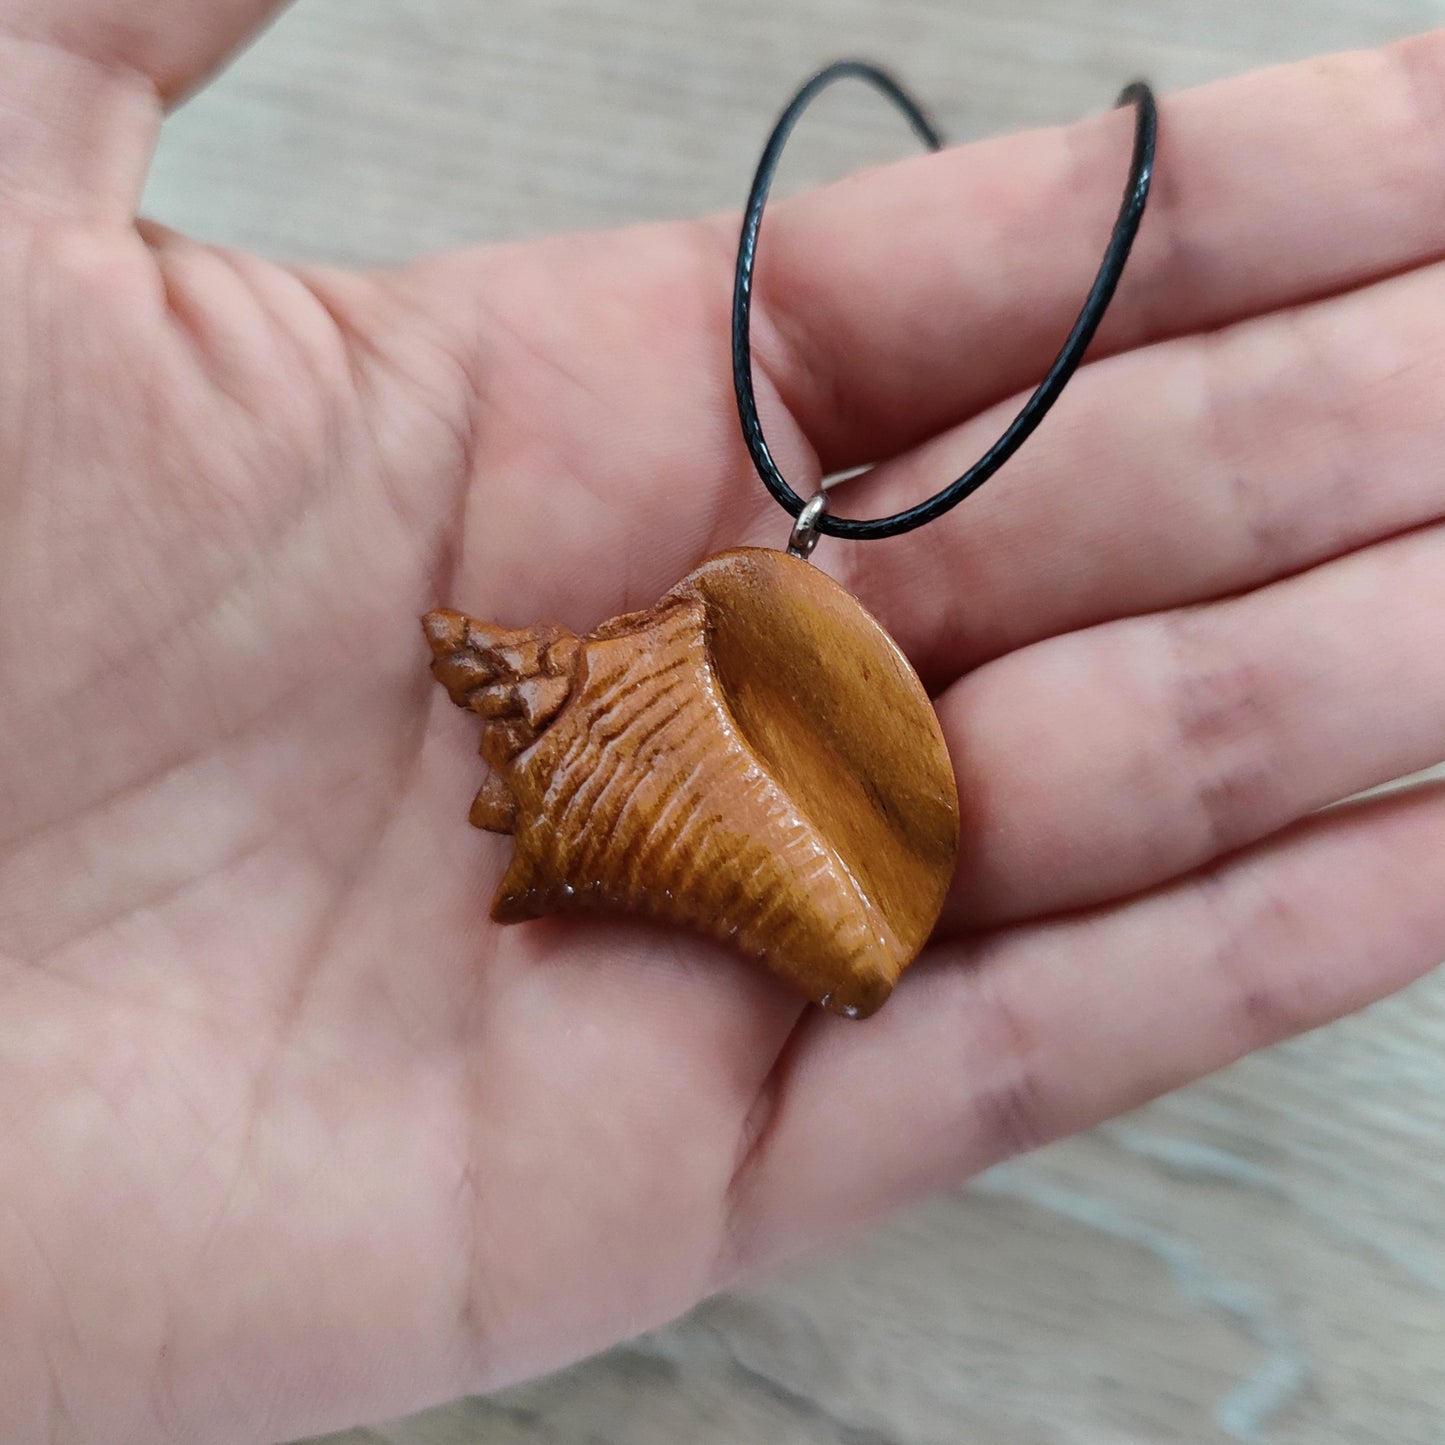 Conch "Lambi" Necklace | Hand-Carved Apricot Wood Pendant, Waxed Rope | Secrets of Ouanalao